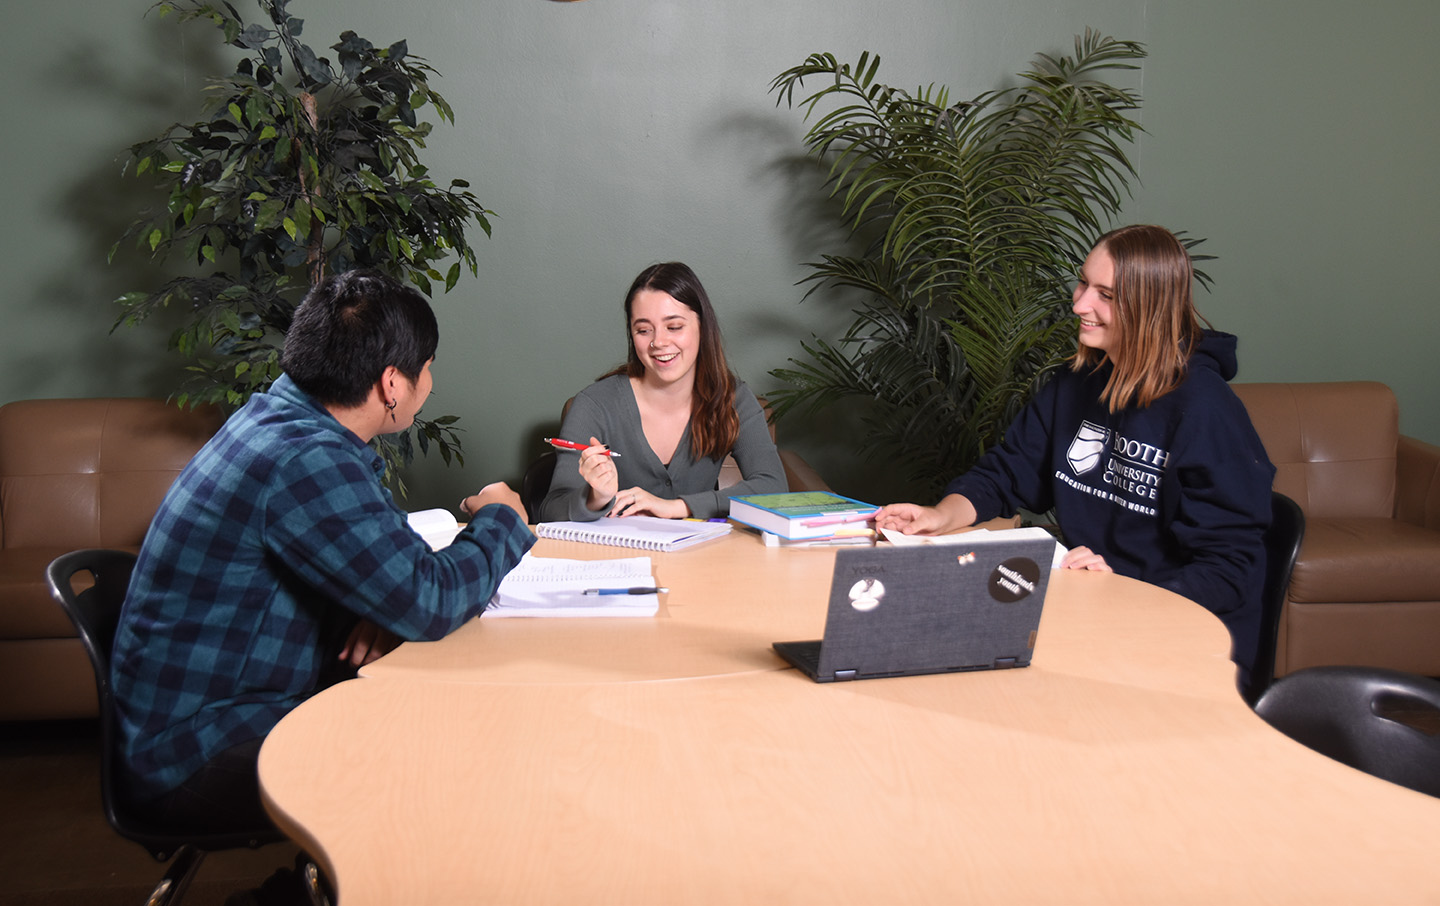 Three students working together at a table with papers and textbooks.